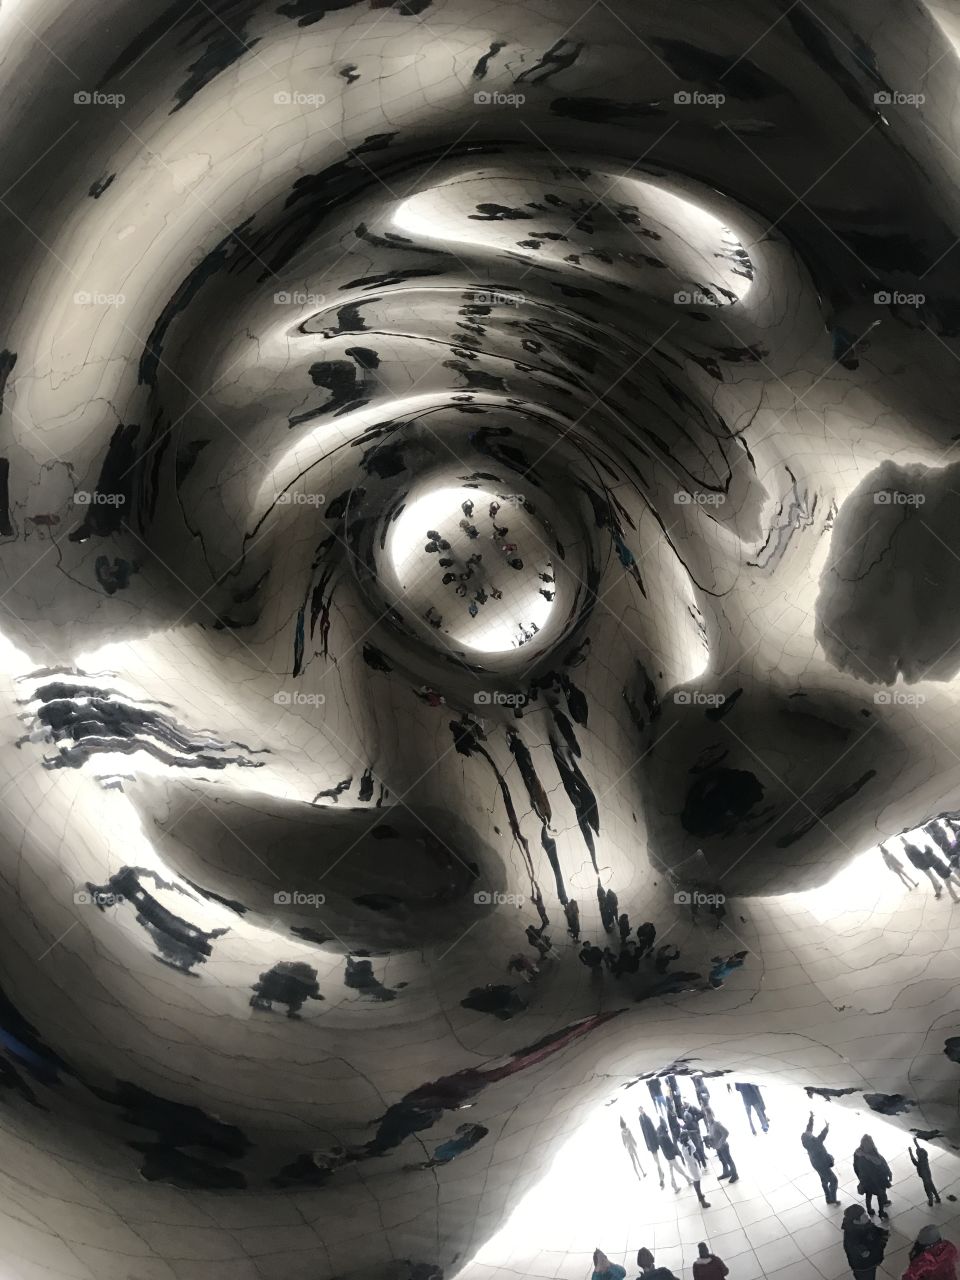 An artsy take on The Bean in Chicago